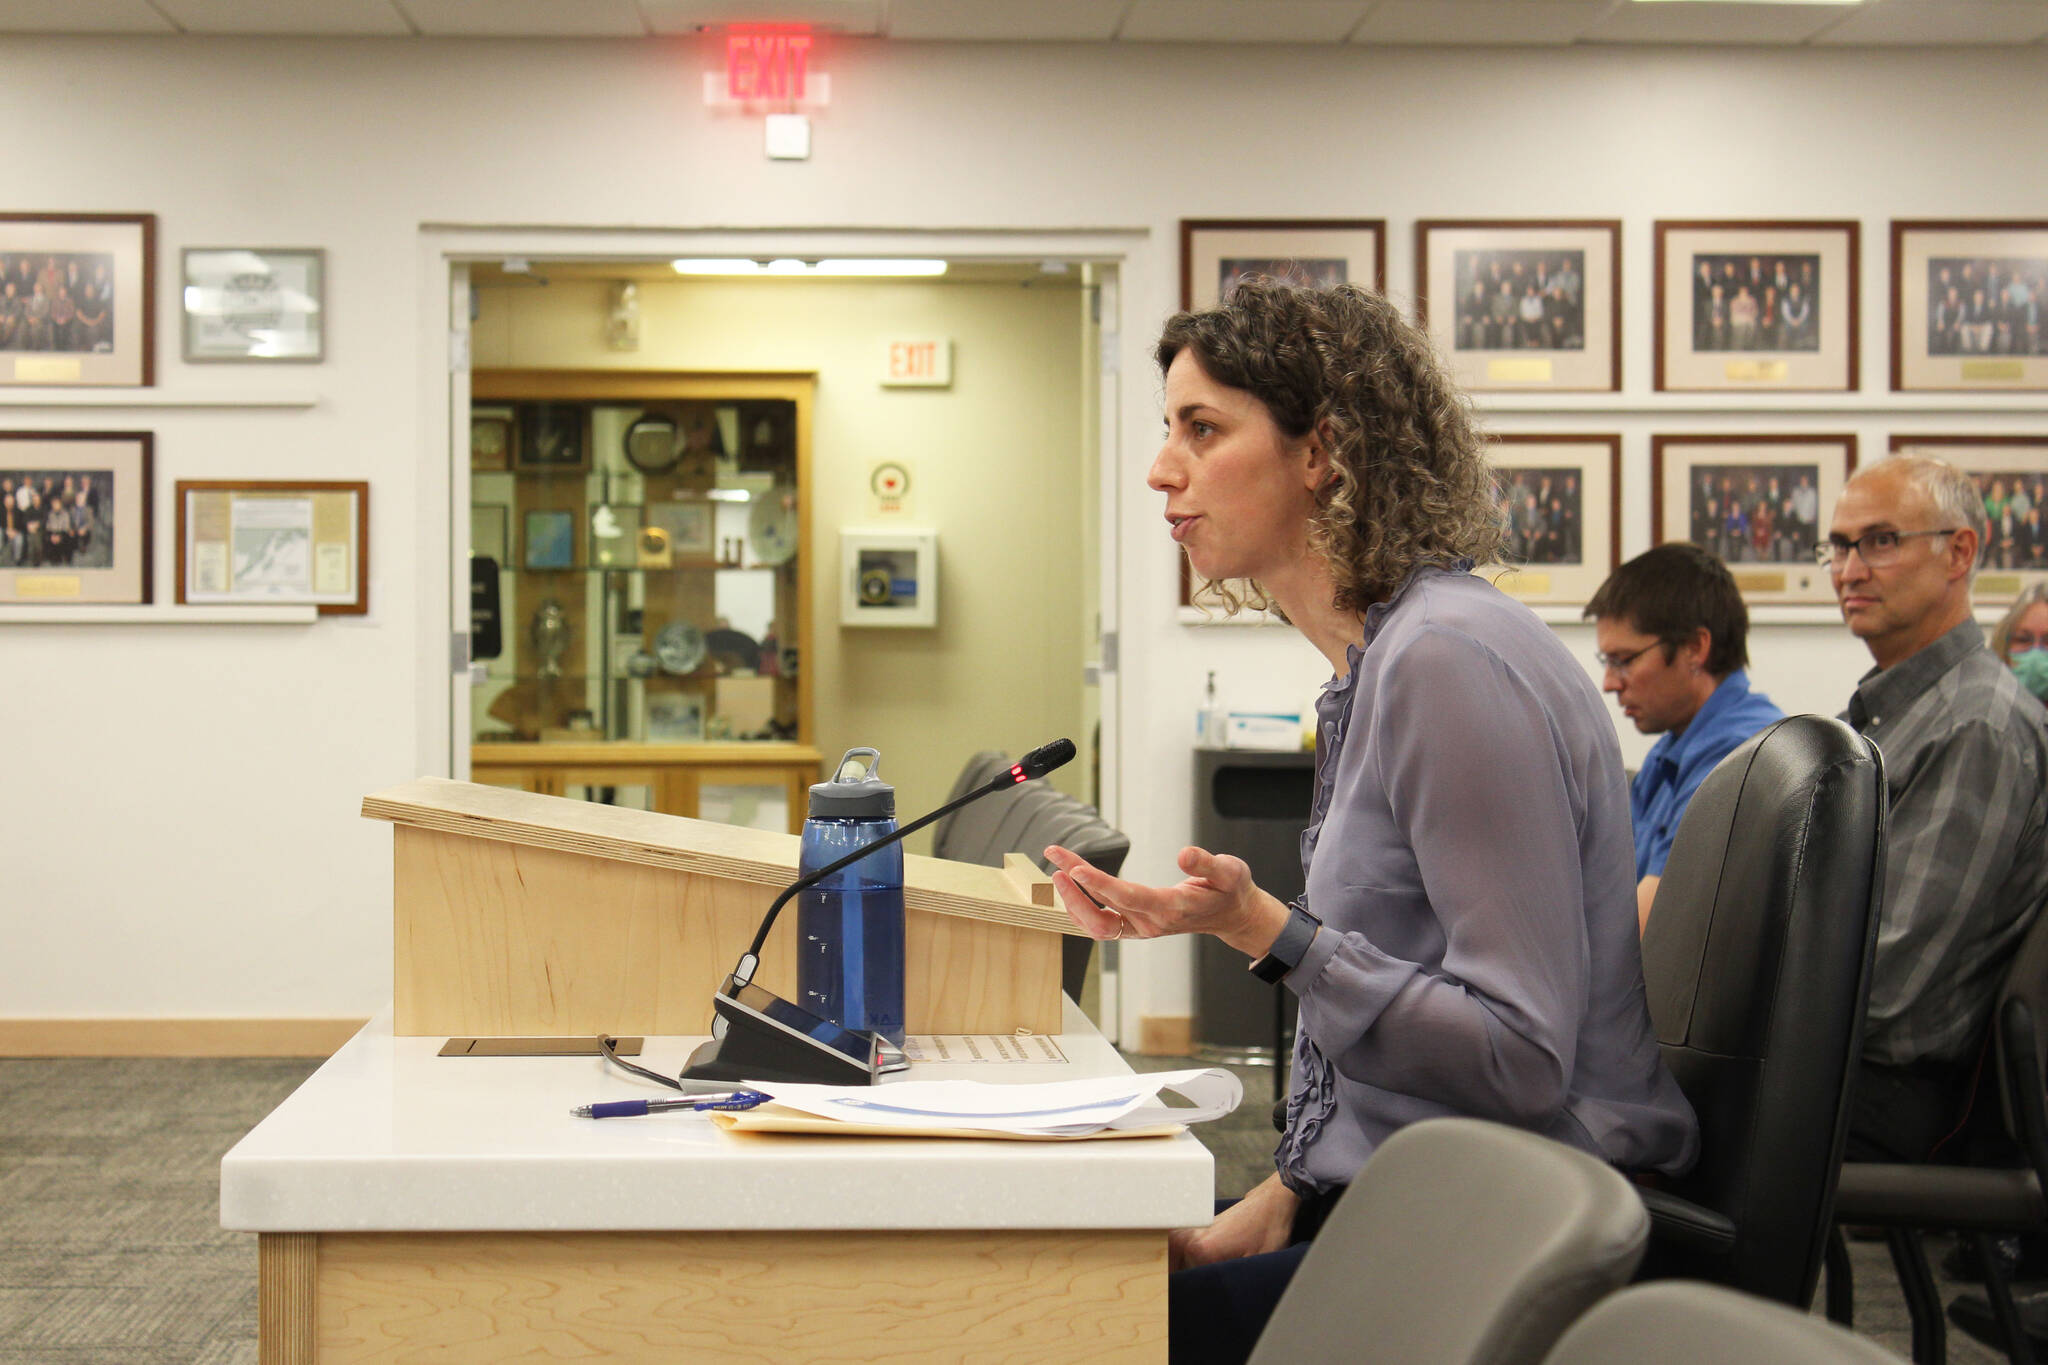 Ashlyn O’Hara/Peninsula Clarion 
Renewable IPP CEO Jenn Miller presents information about solar power during a meeting of the Kenai Peninsula Borough Assembly on Oct. 12 in Soldotna.